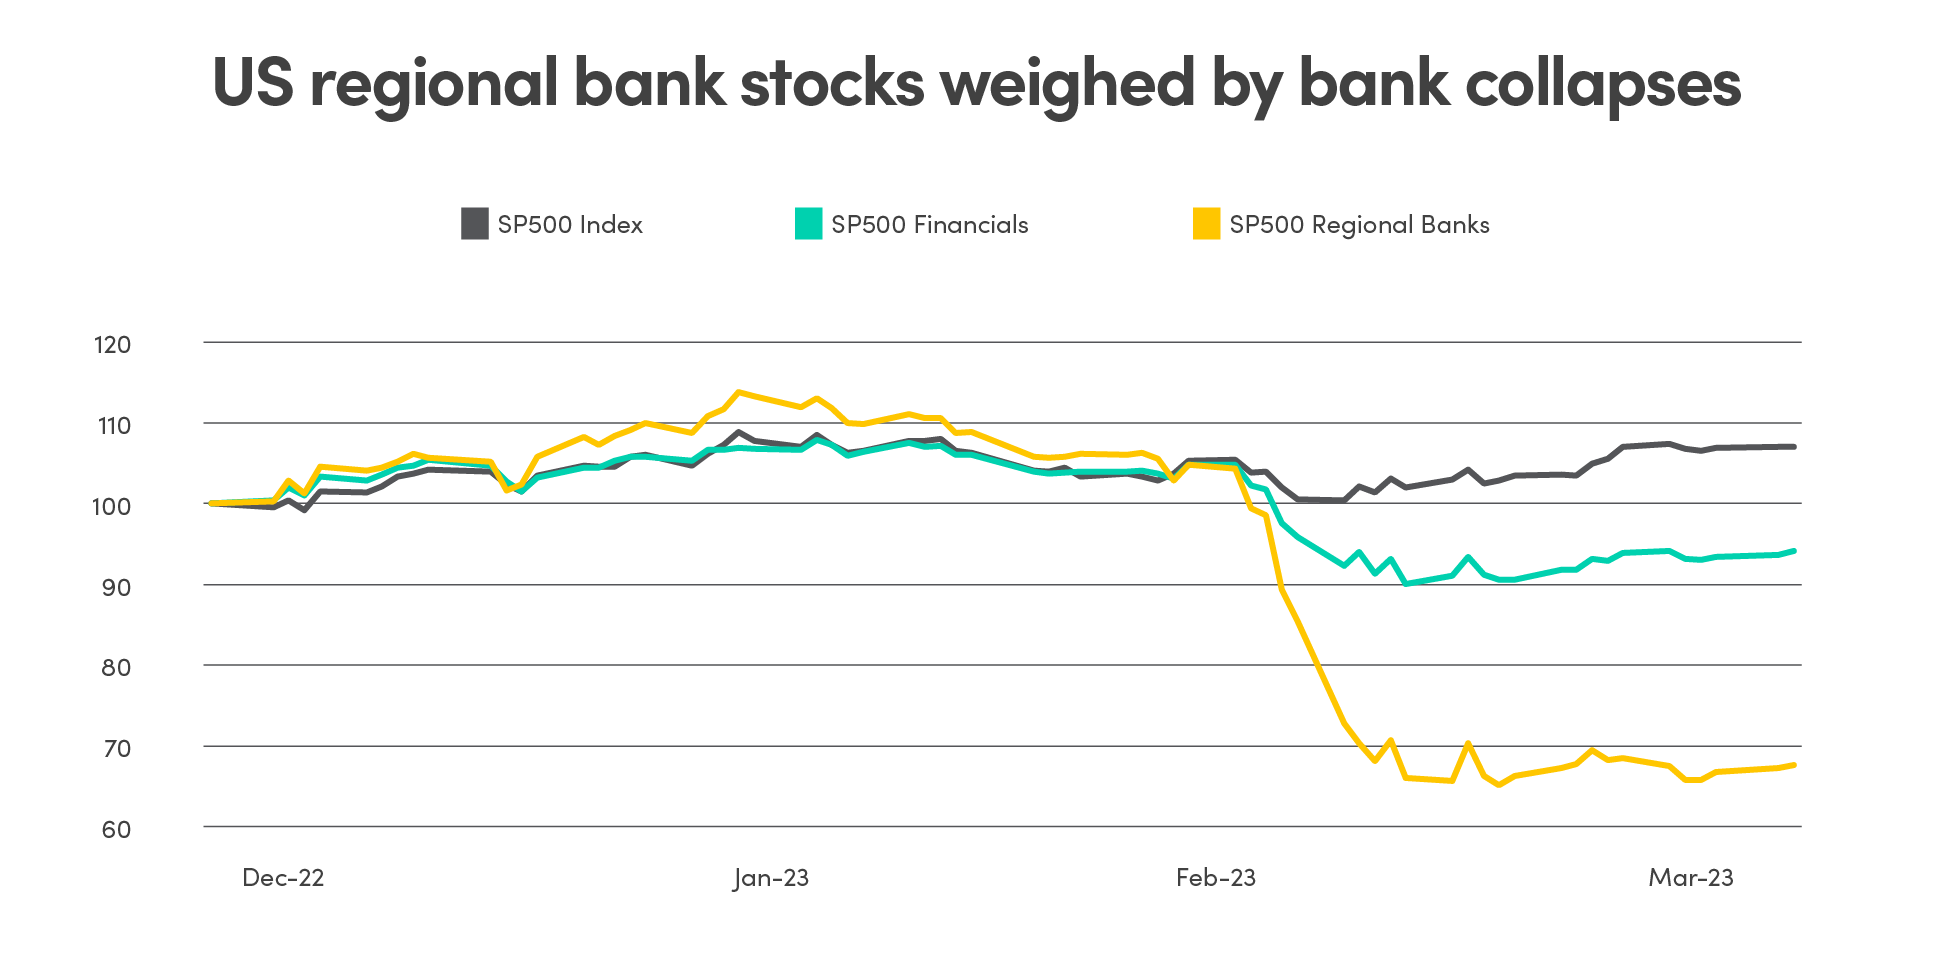 Line graph showing US regional bank stocks weighed by bank collapses, from December 2022 to March 2023. Comparison of SP500, SP500 Financials and SP500 Regional Banks.